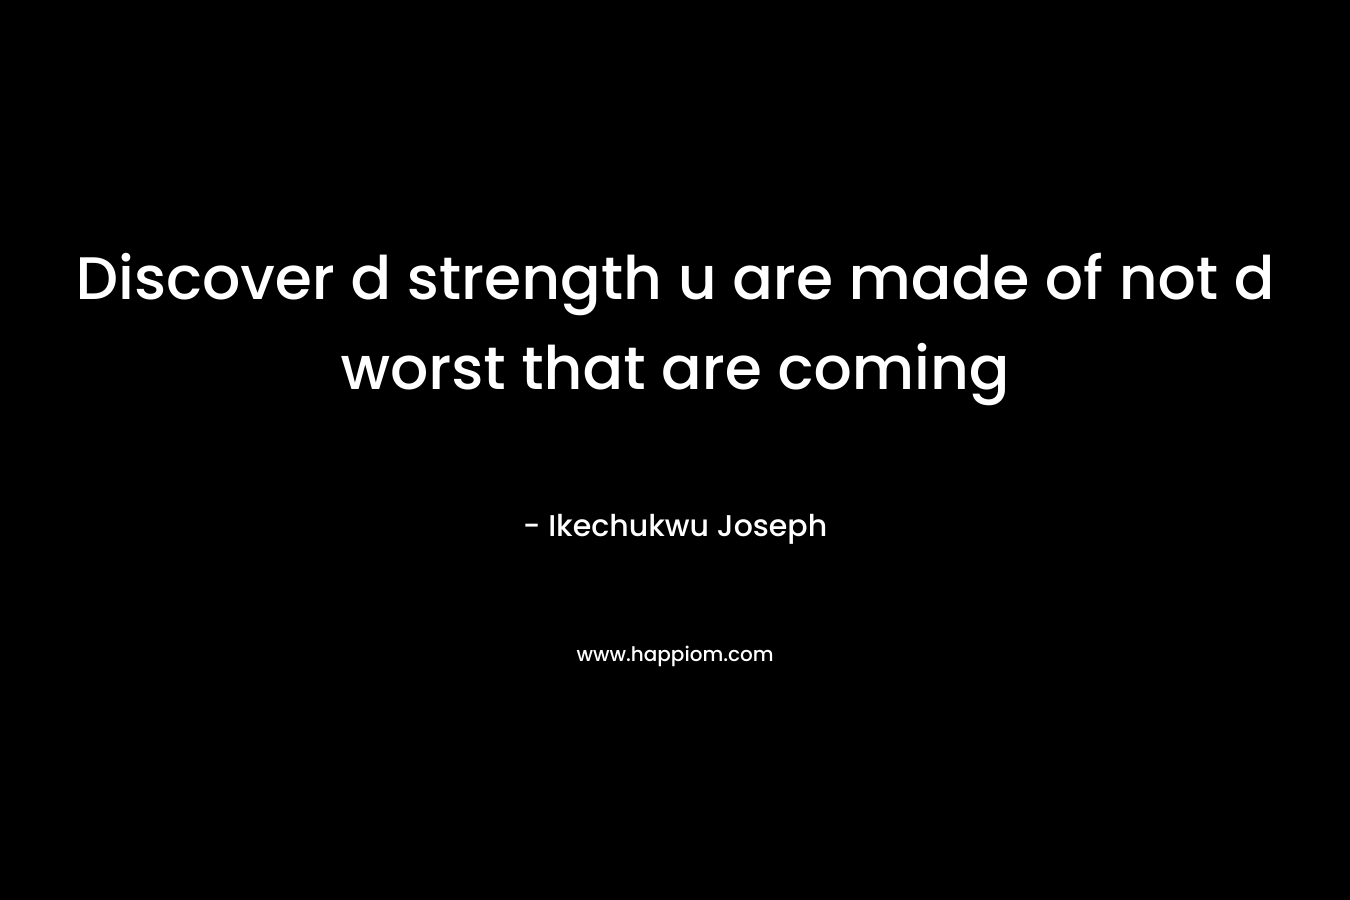 Discover d strength u are made of not d worst that are coming